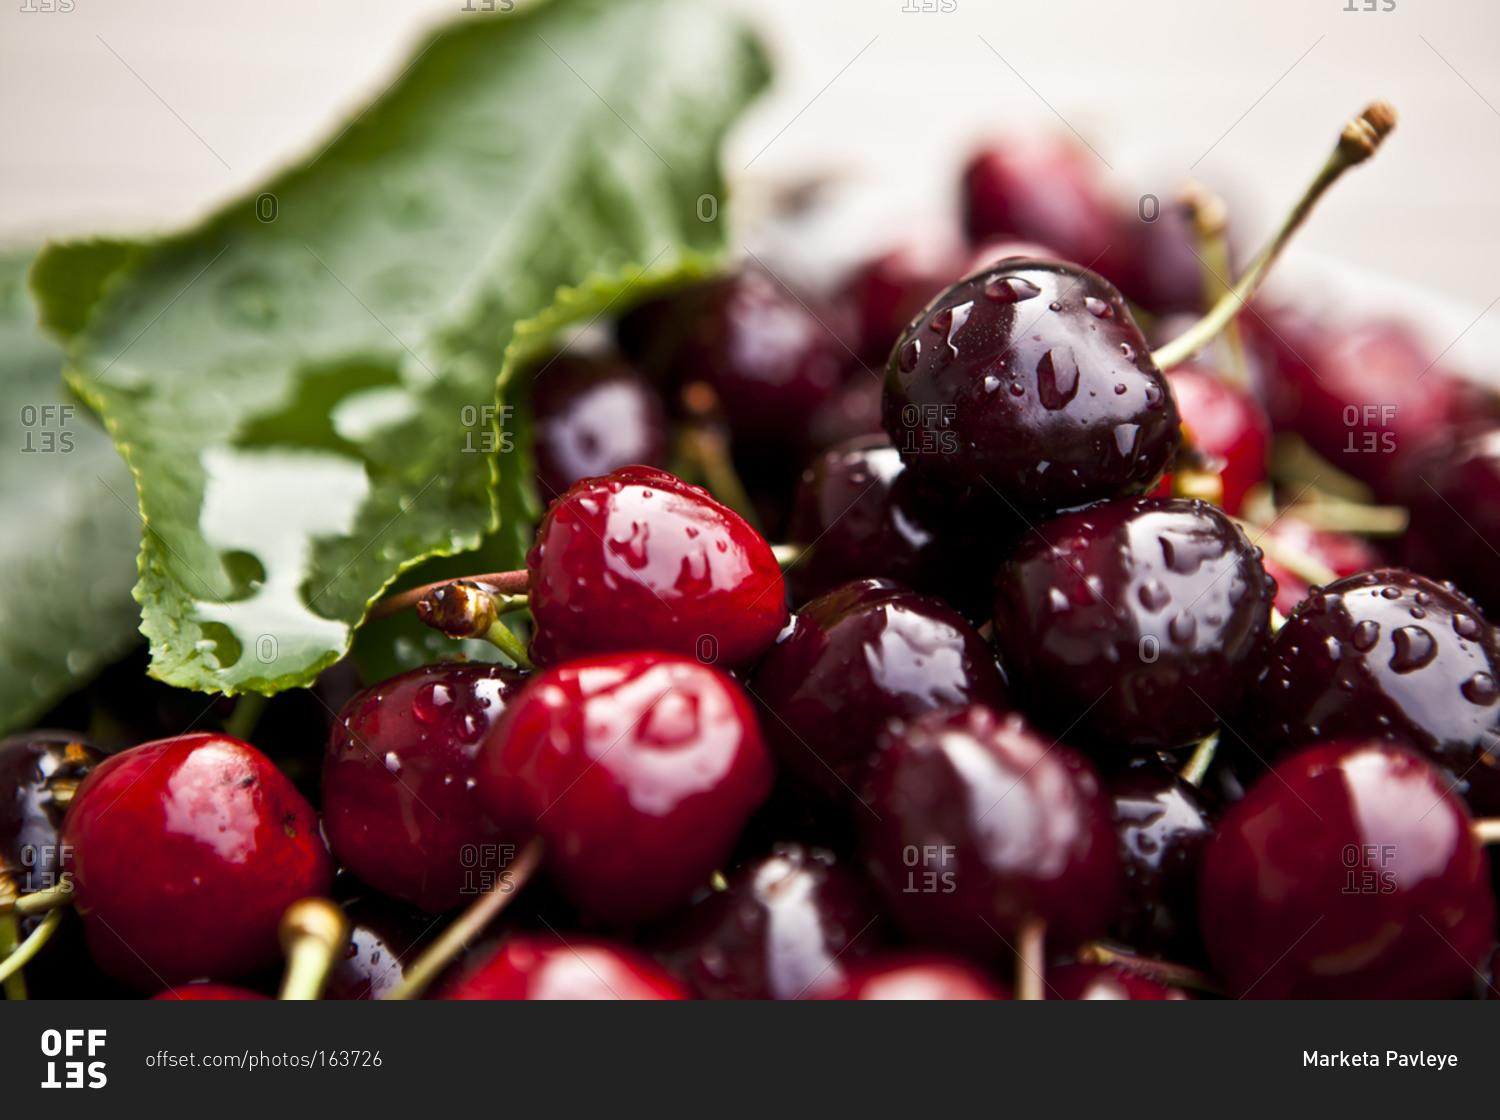 A pile of red cherries